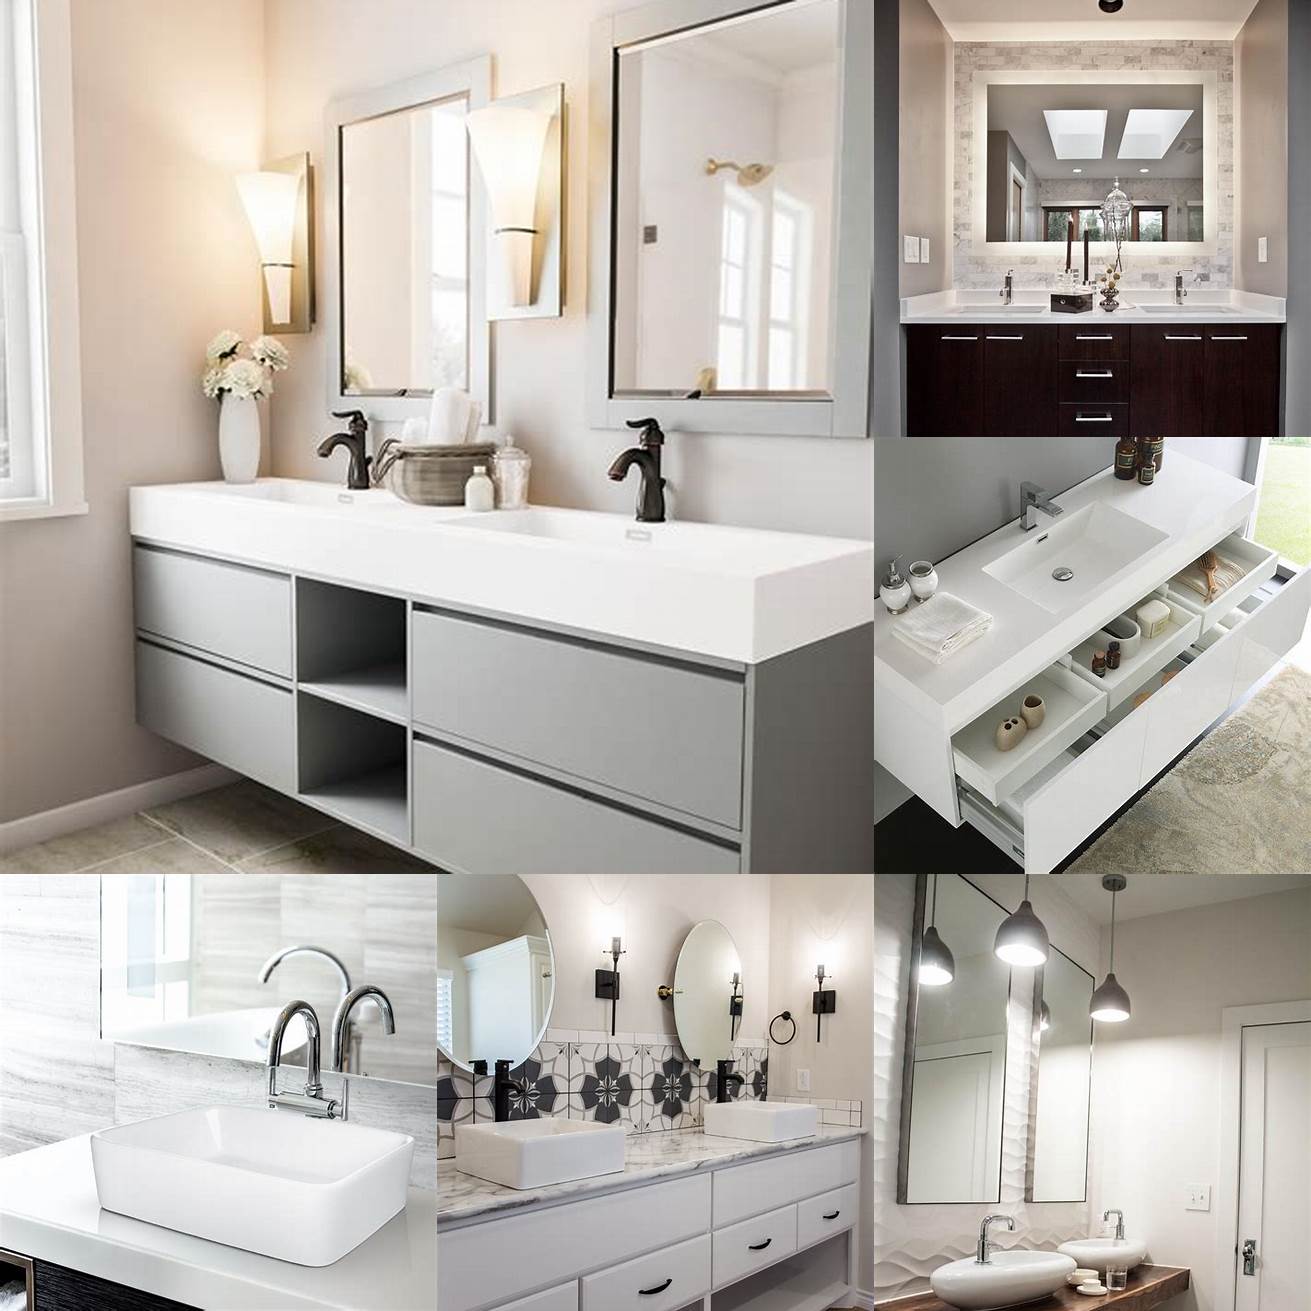 A sleek and modern white vanity adds a touch of elegance to any bathroom